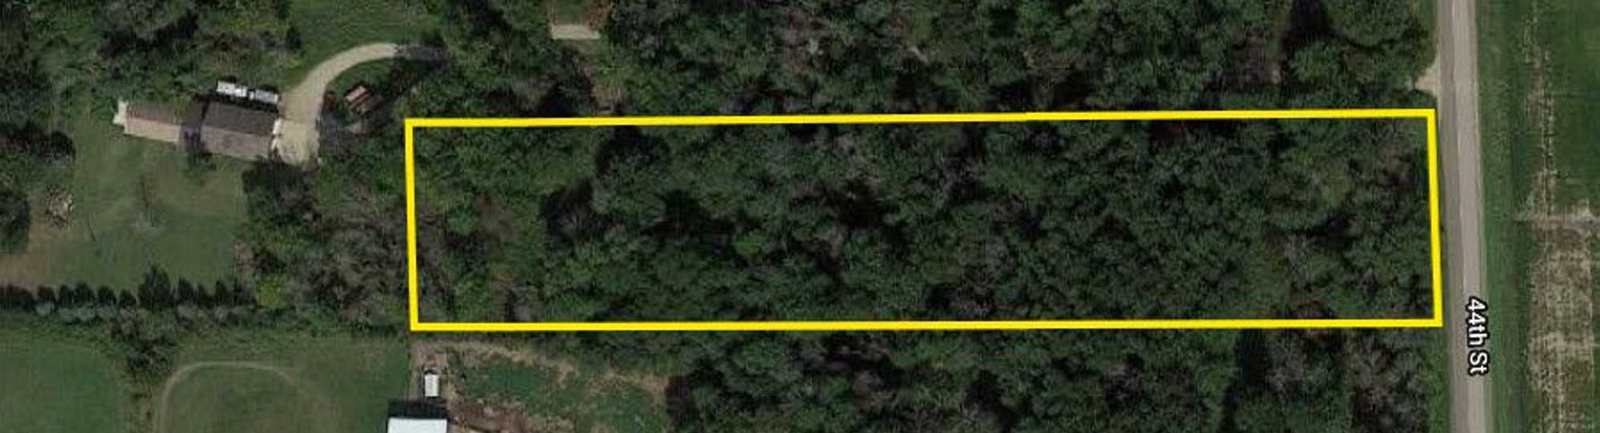 vacant land for sale